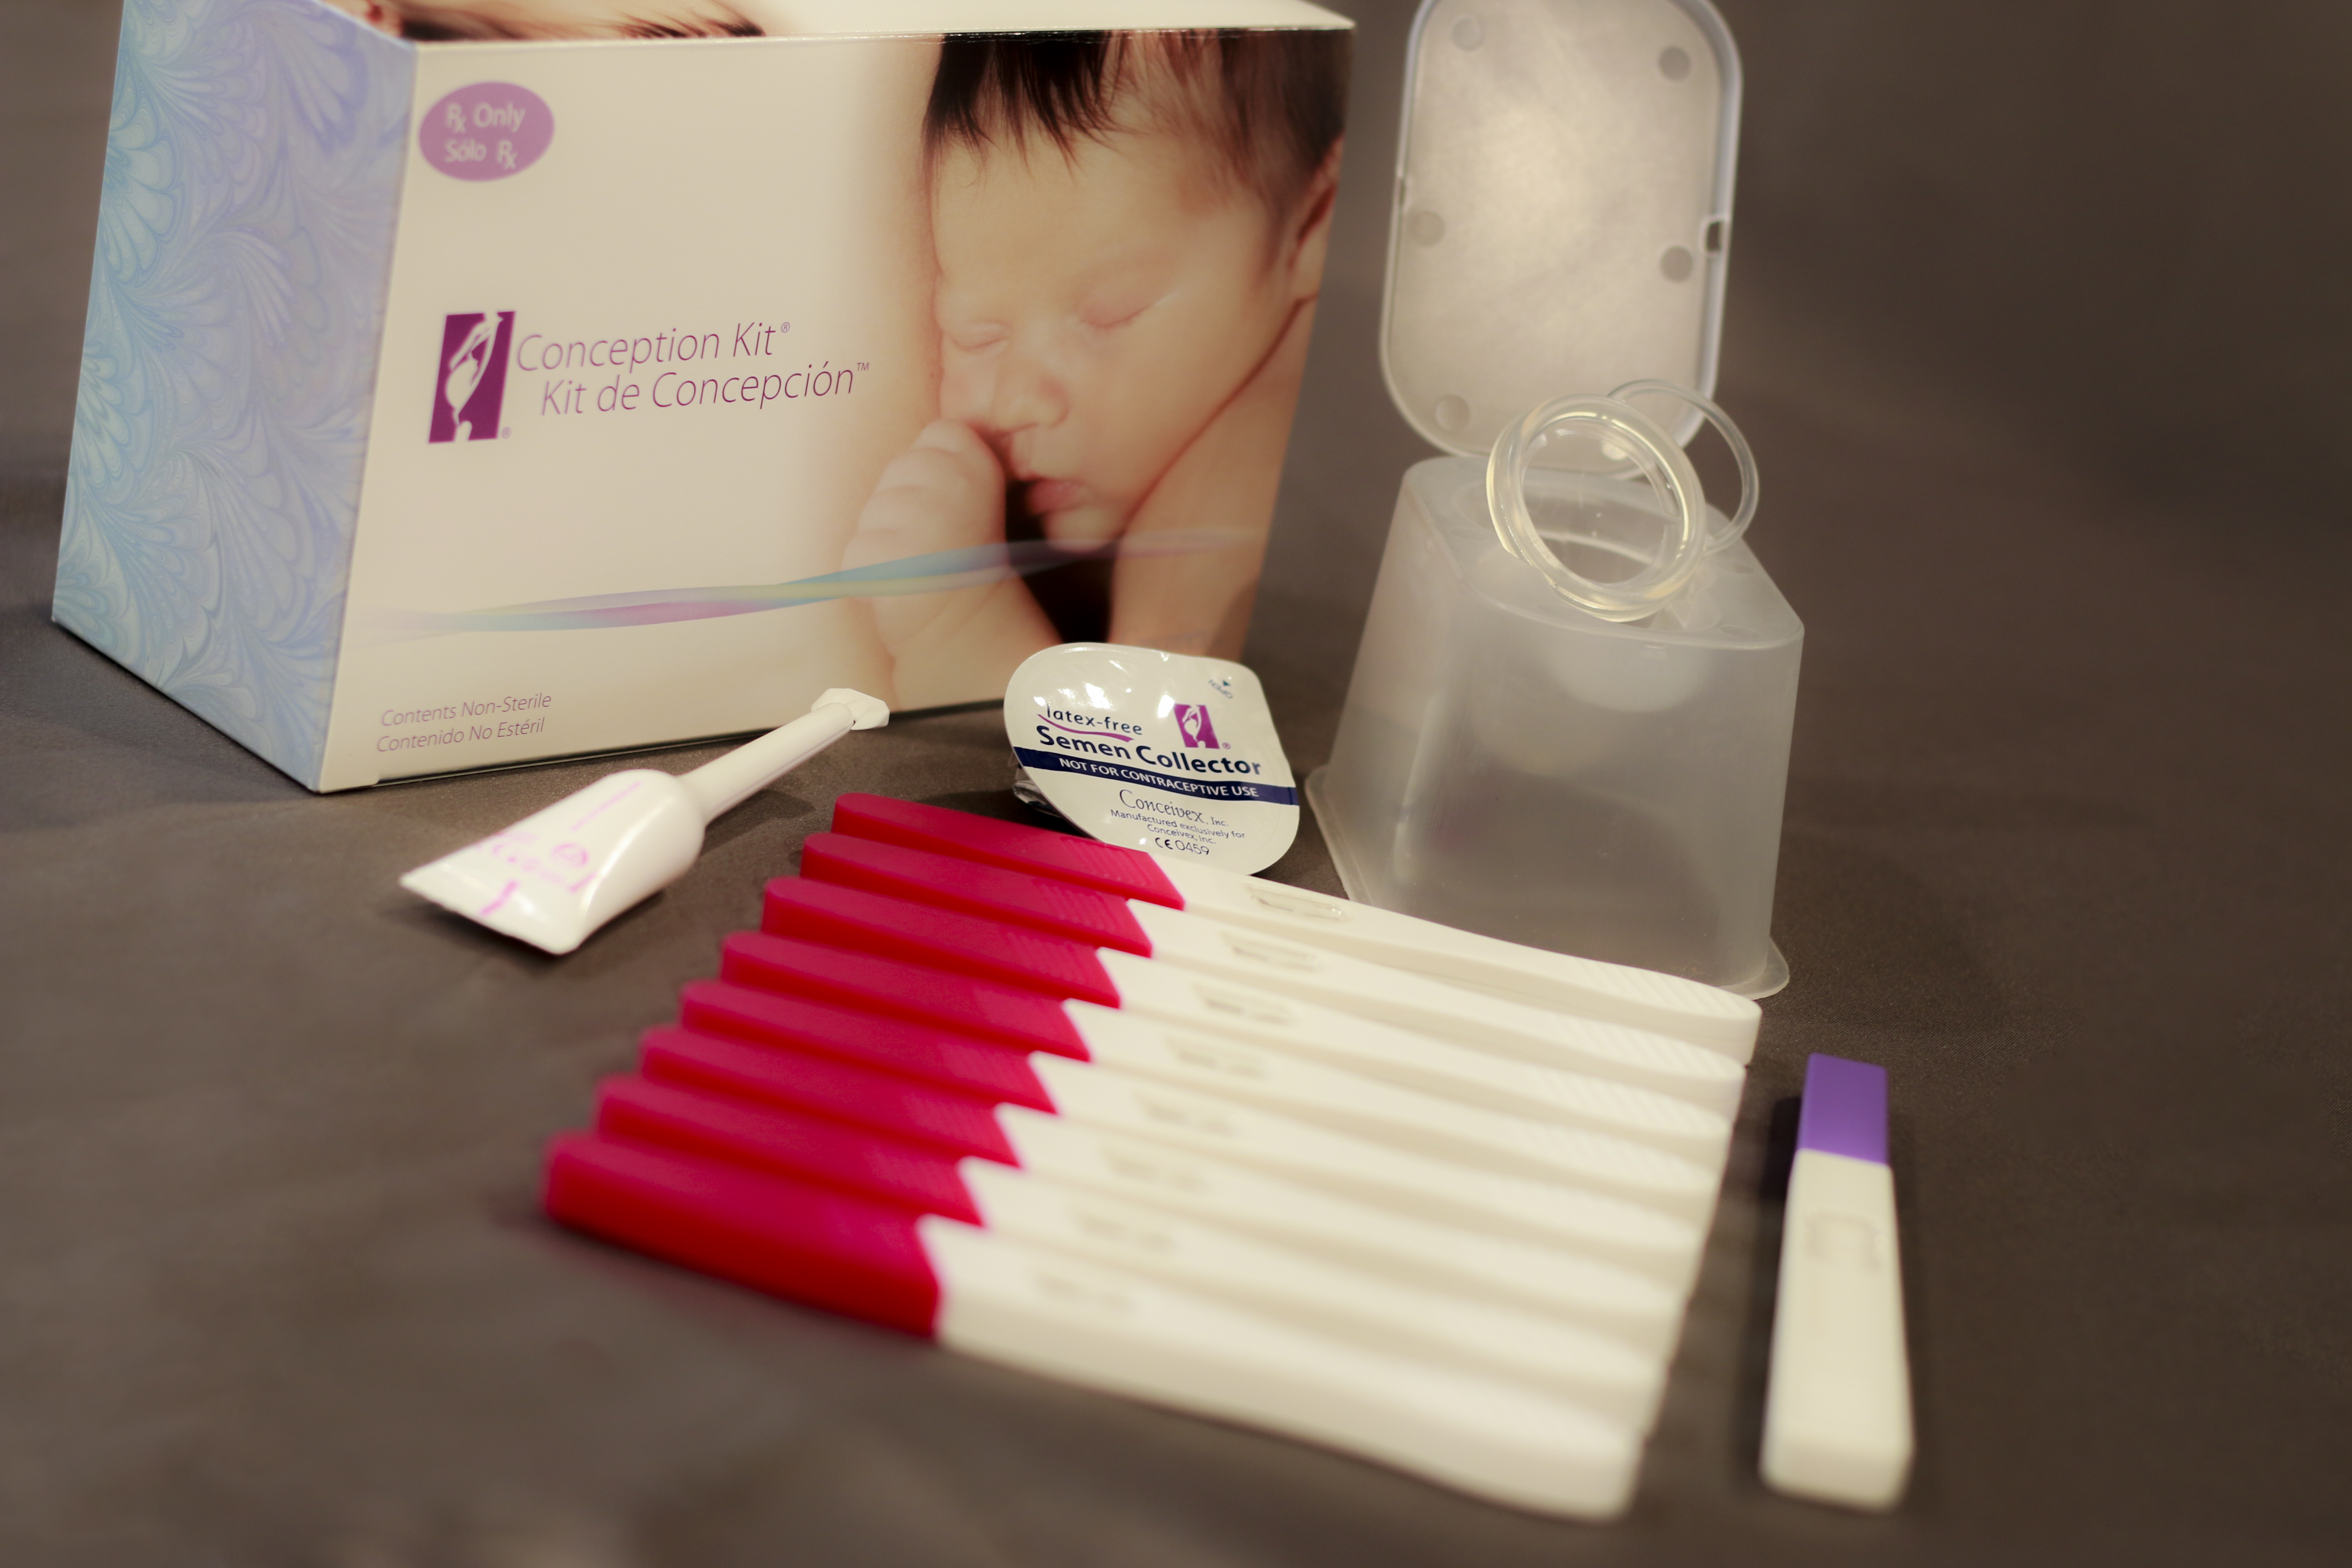 The Simple Recipe For Getting Pregnant featuring the Conception Kit® at-home system